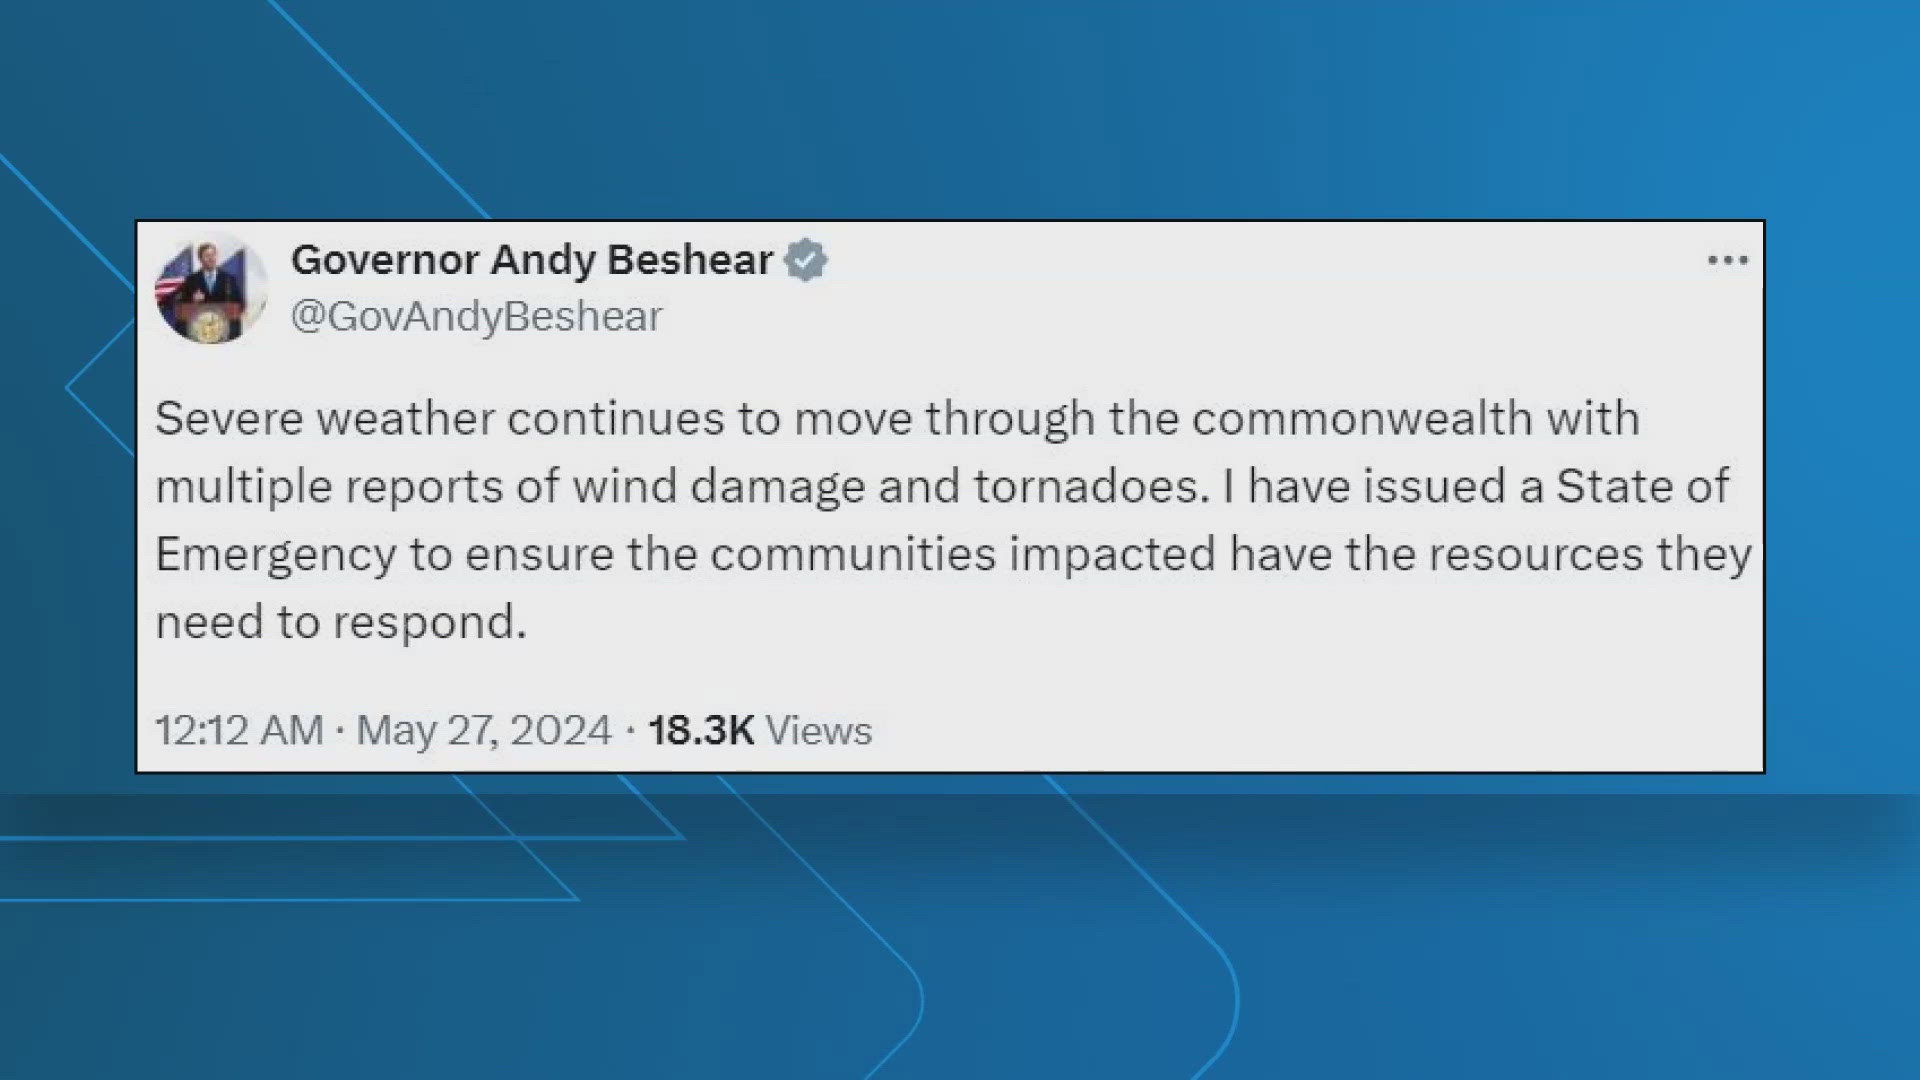 The Governor says the State of Emergency is to ensure communities most impacted by the severe weather Sunday gets the help they need.